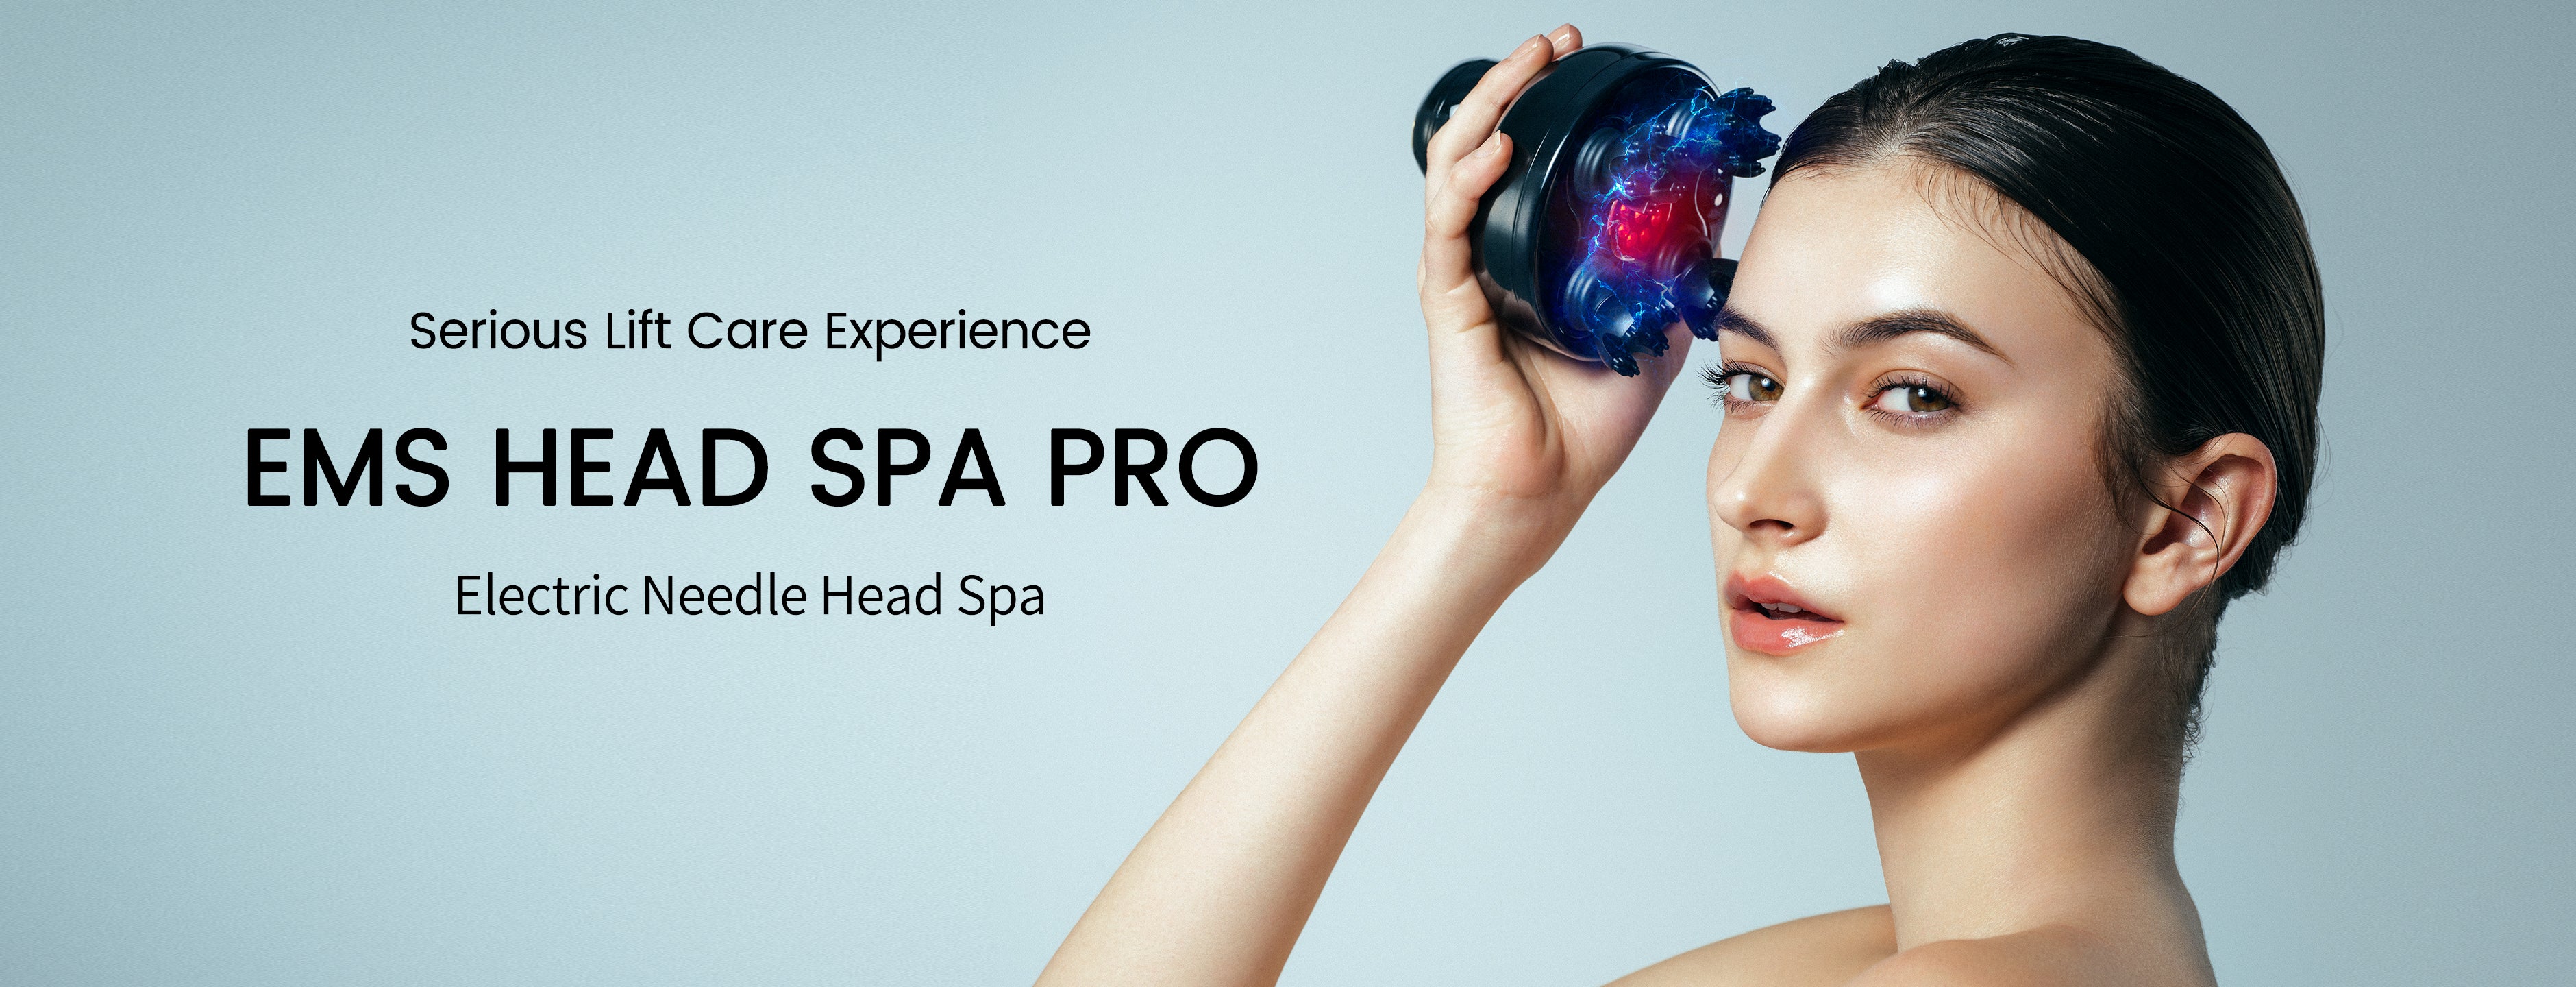 EMS HEAD SPA PRO – MYTREX